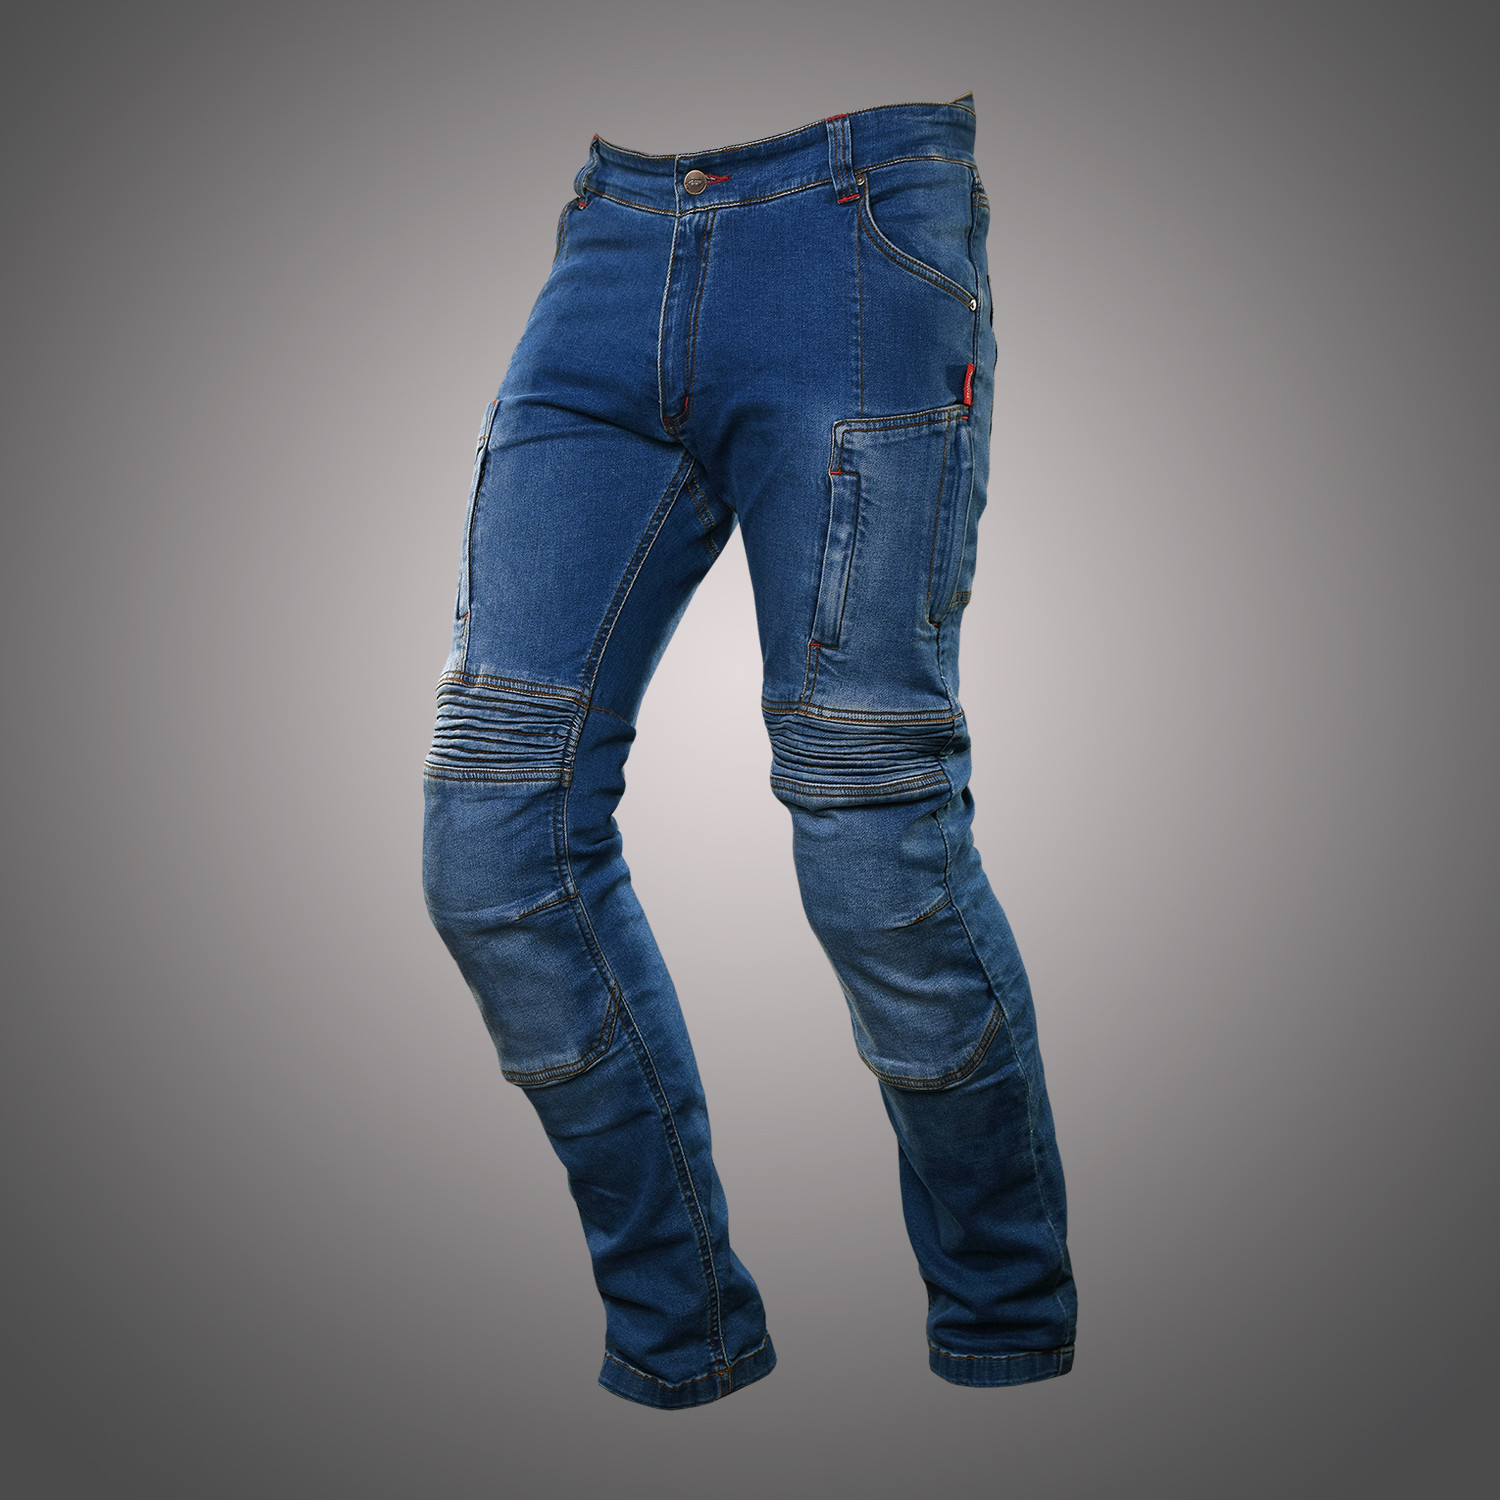 Shift Reinforced made with Kevlar motorcycle jeans 36